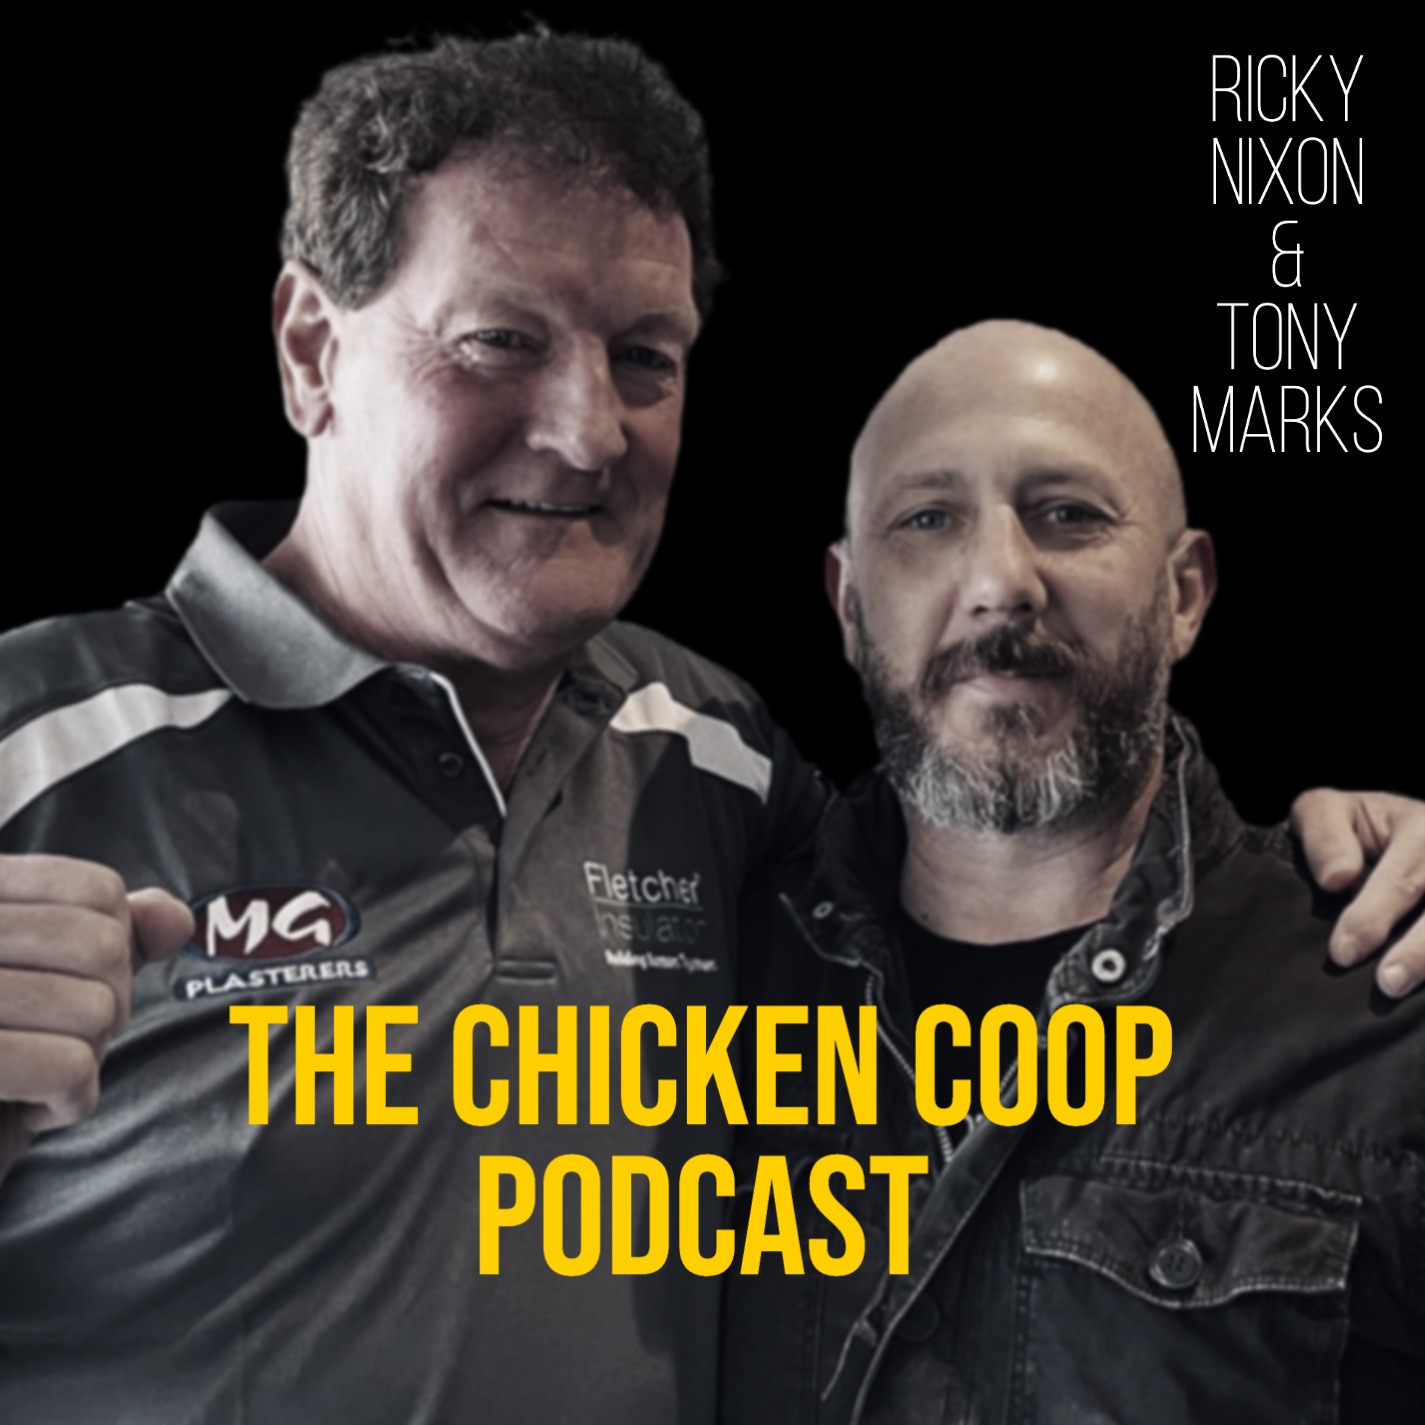 The Chicken Coop with Ricky Nixon & Tony Marks - Episode 8